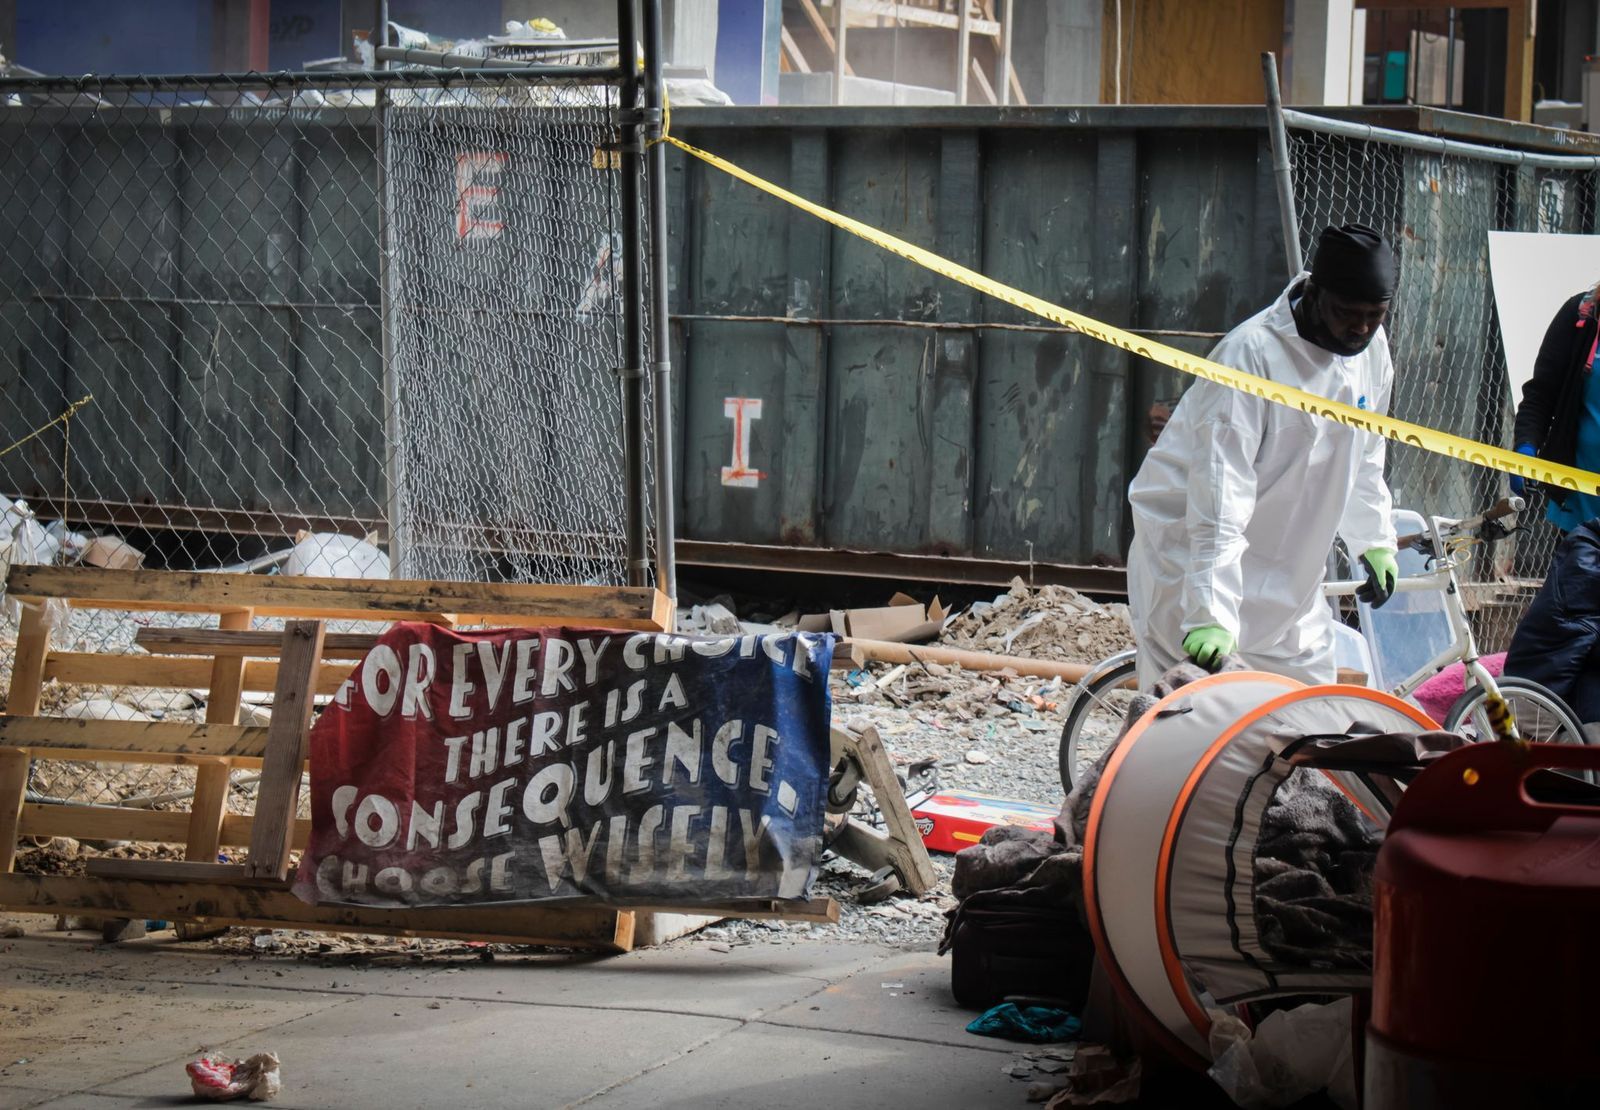 A DC city worker moves belongings past the caution tape as a weathered sign next to him reads “For every choice there is a consequence. Choose wisely.” Eleanor Goldfield | ArtKillingApathy.com